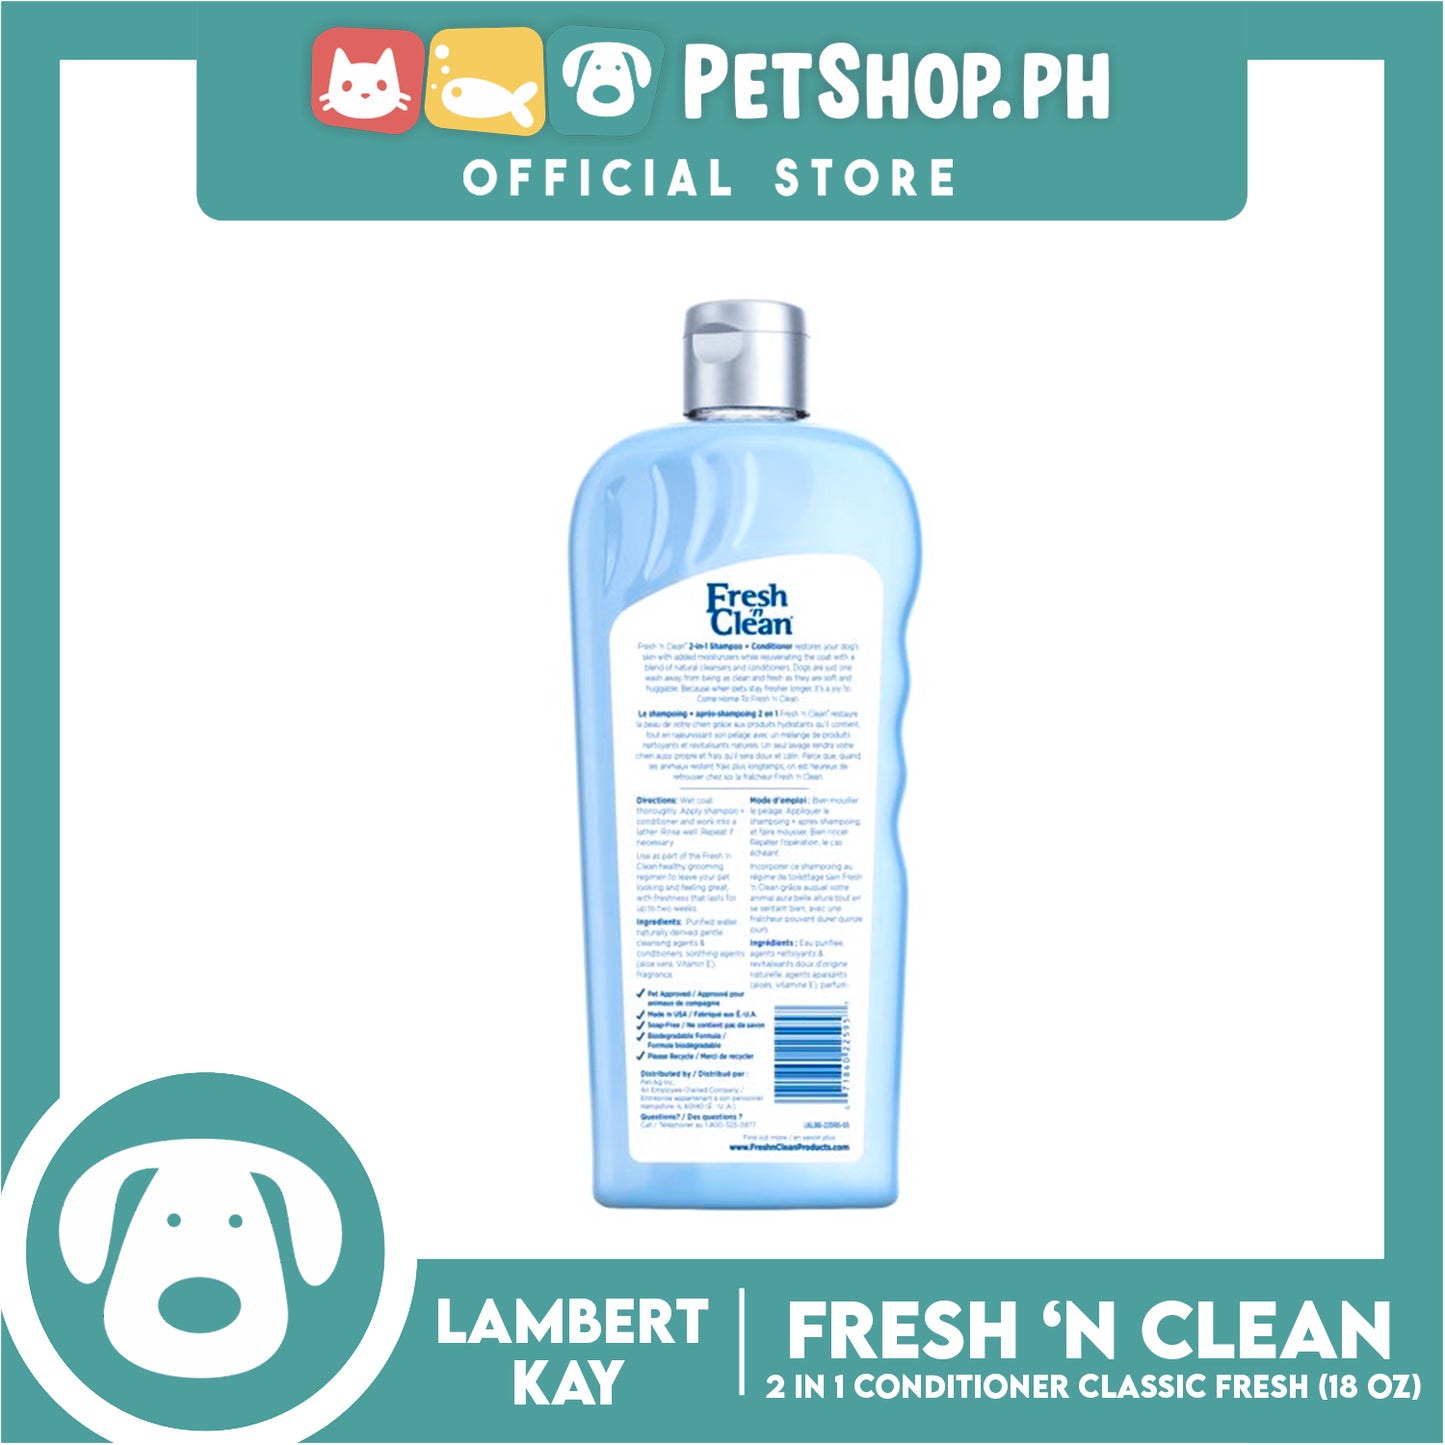 Lambert Kay Fresh 'N Clean 2-in-1 Dog Shampoo and Conditioner, Baby Powder Scent 18oz (Classic Fresh)